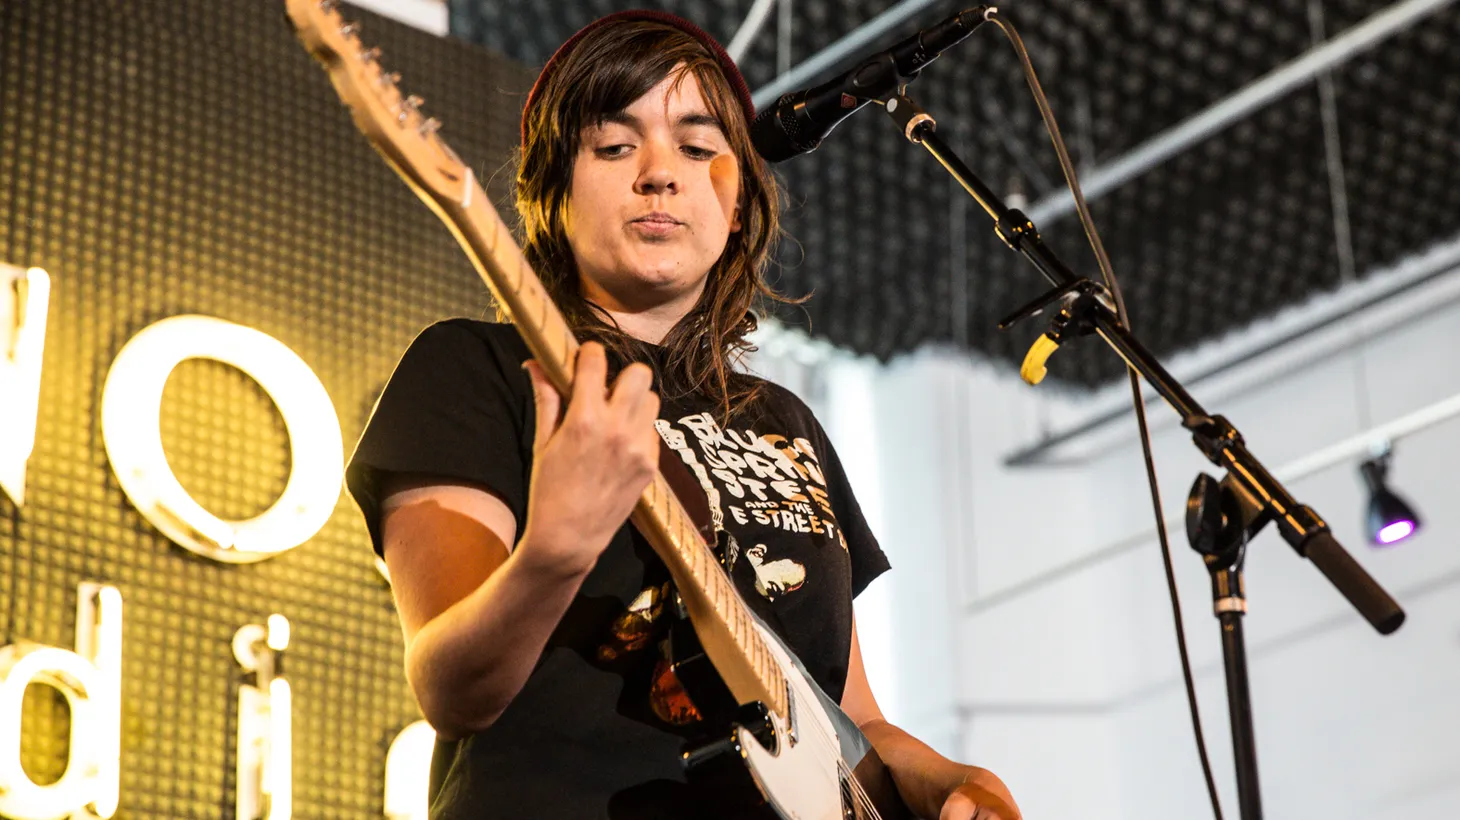 KCRW caught up with critically-acclaimed Australian singer/guitarist Courtney Barnett as she prepared to play one of the biggest shows of her career at the Hollywood Bowl.